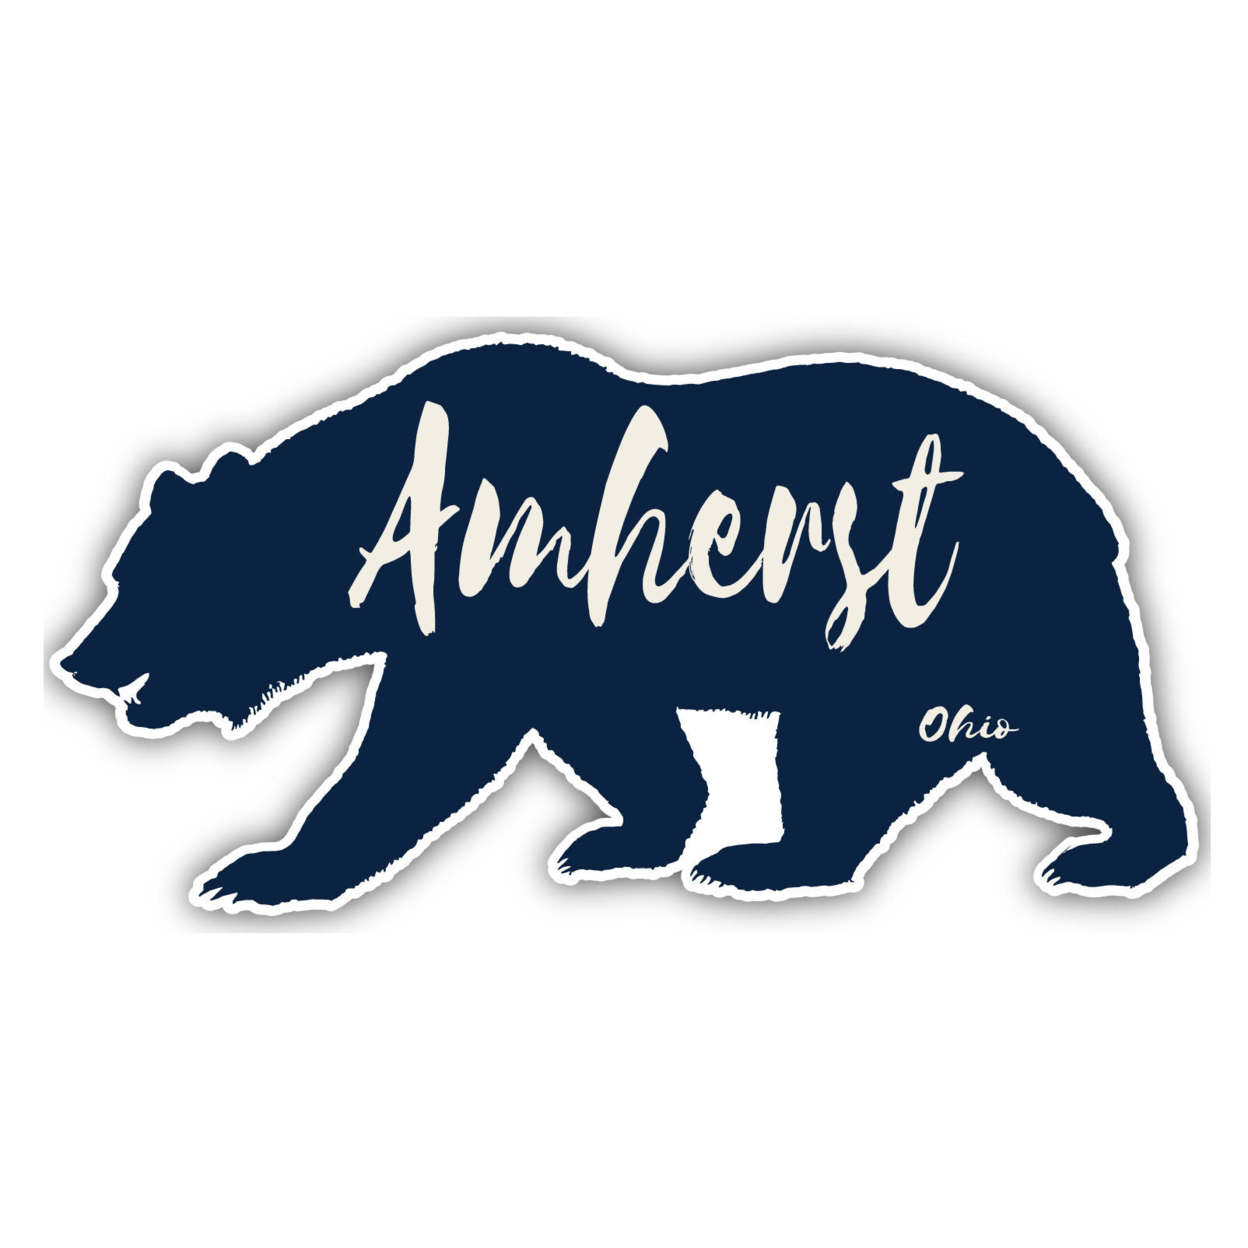 Amherst Ohio Souvenir Decorative Stickers (Choose Theme And Size) - 4-Pack, 6-Inch, Bear